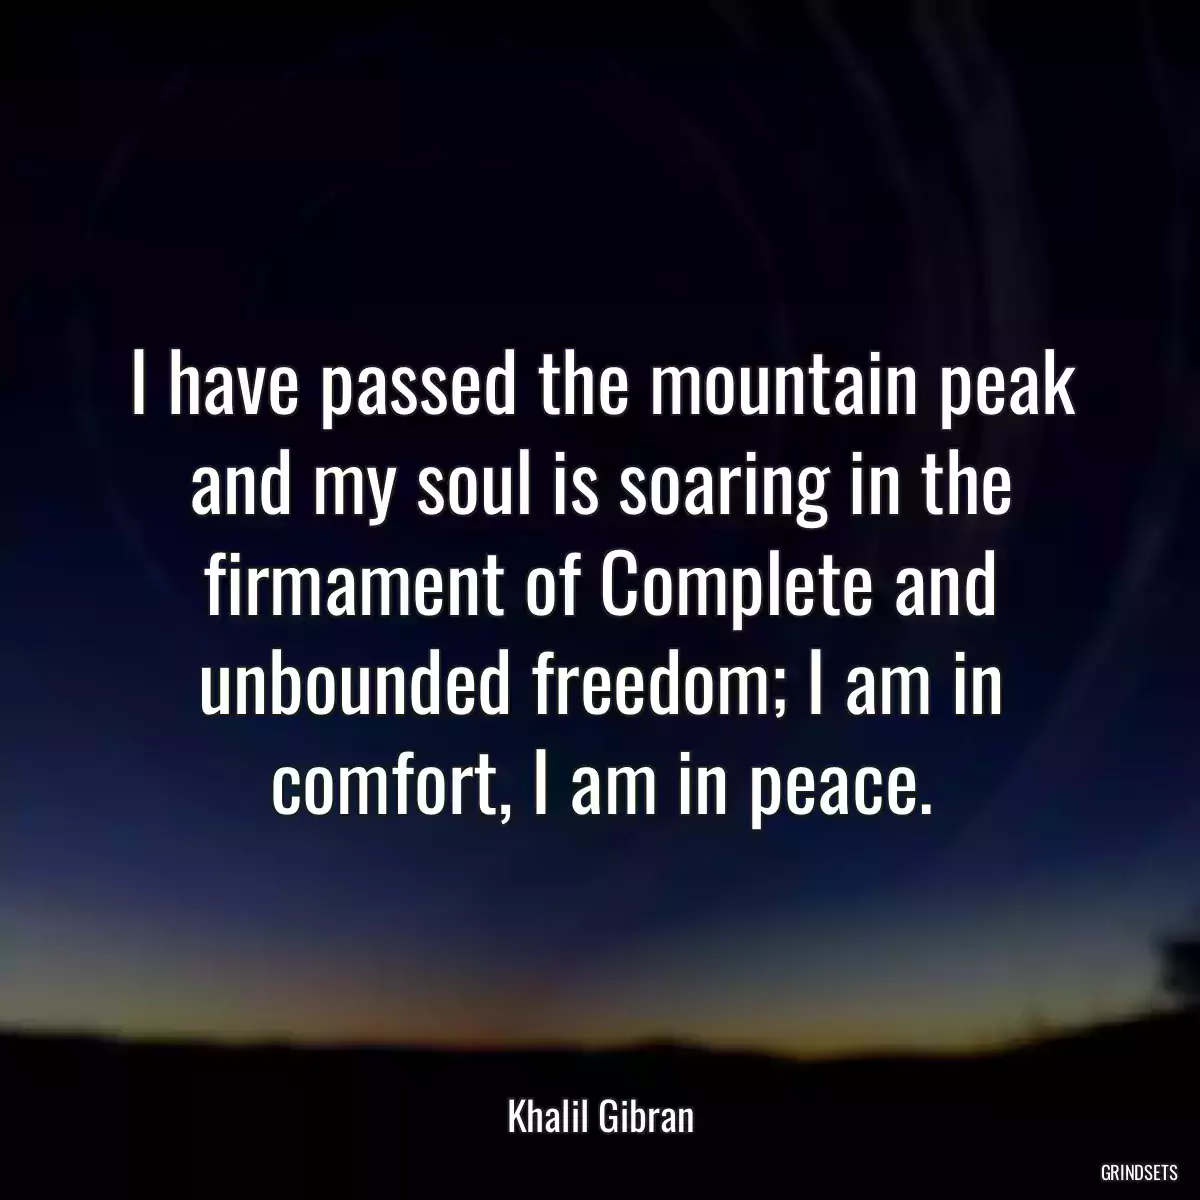 I have passed the mountain peak and my soul is soaring in the firmament of Complete and unbounded freedom; I am in comfort, I am in peace.